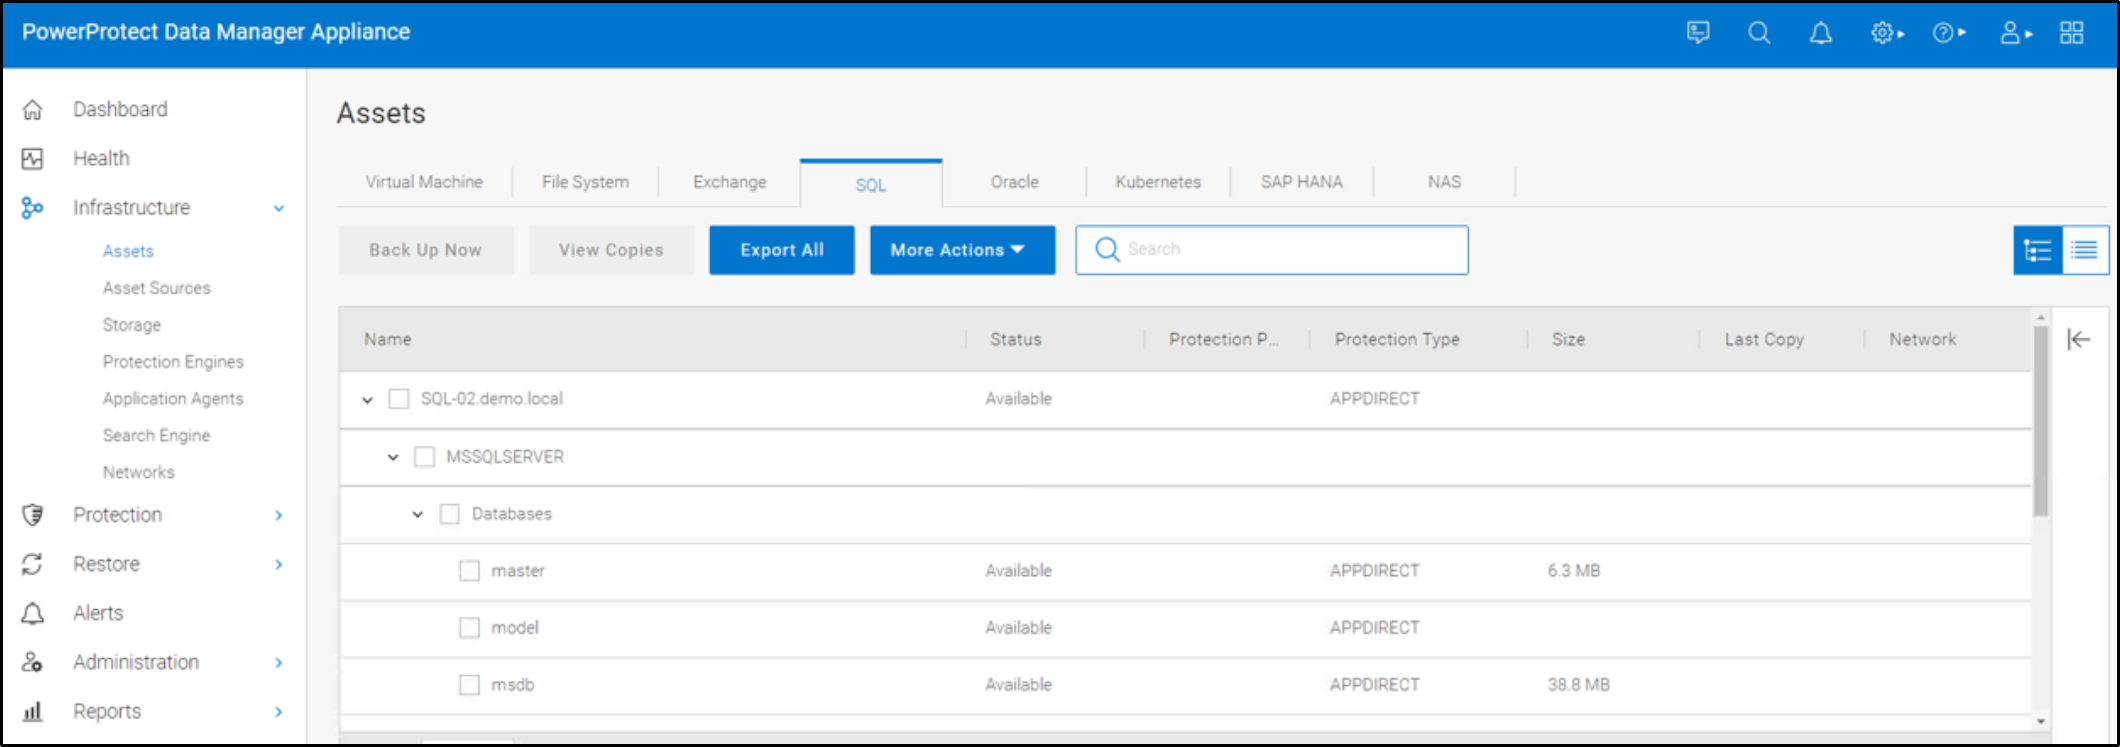 The image shows the SQL assets discovery in Data Manager Appliance UI